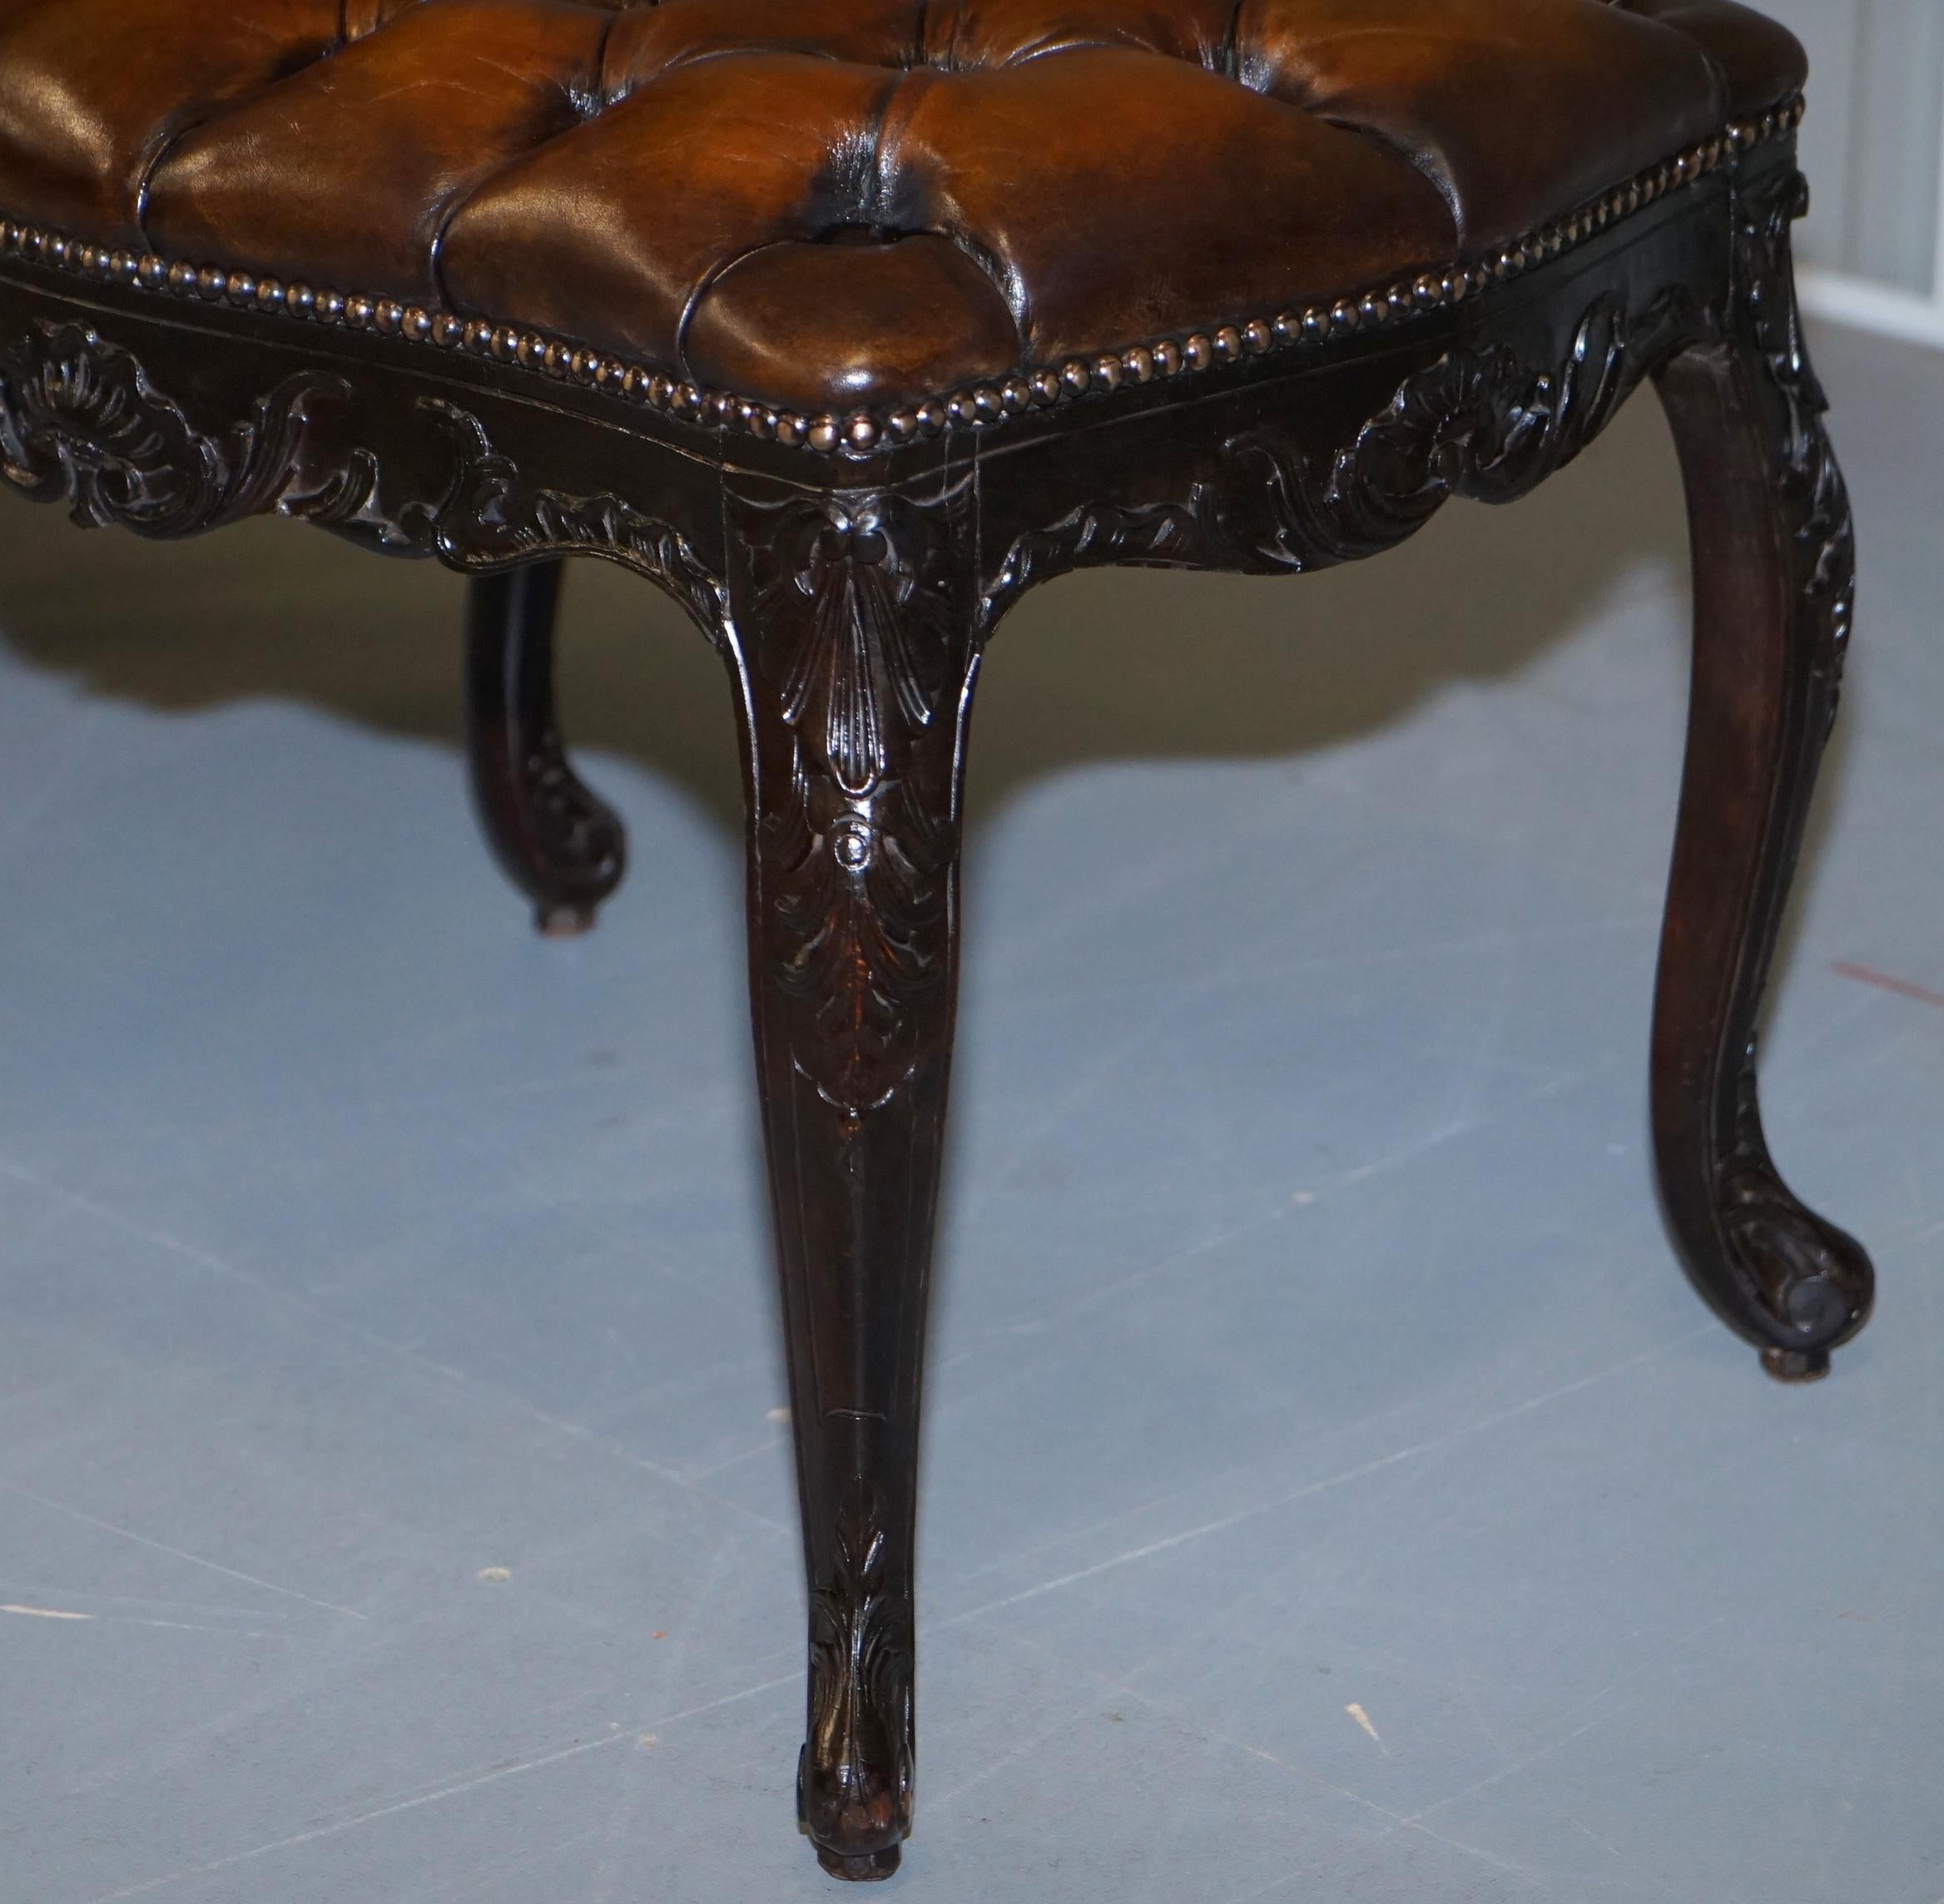 19th Century Fully Restored Victorian Chesterfield Brown Leather Piano Stool Bench 2 Person